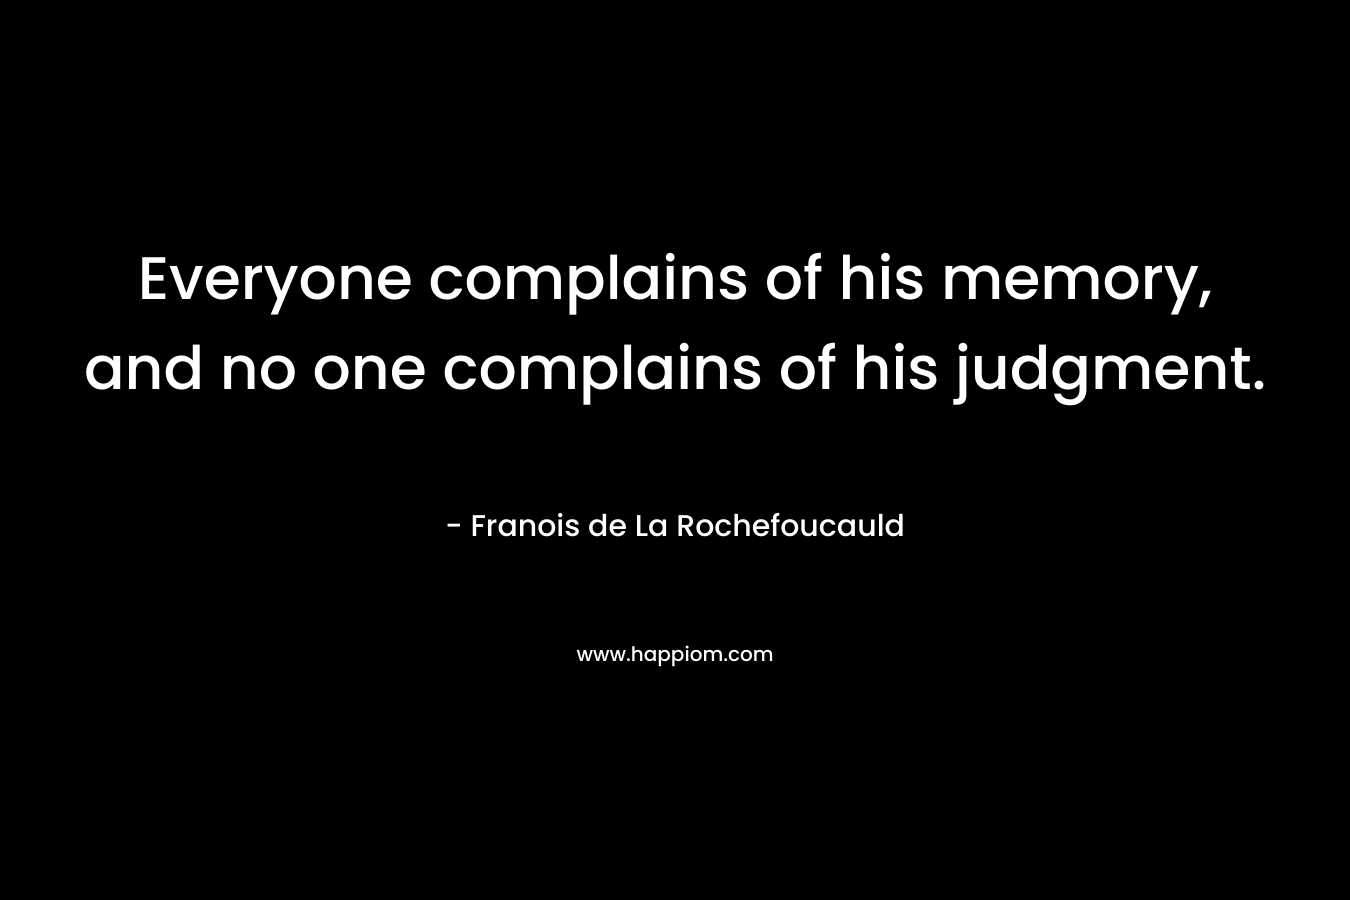 Everyone complains of his memory, and no one complains of his judgment.